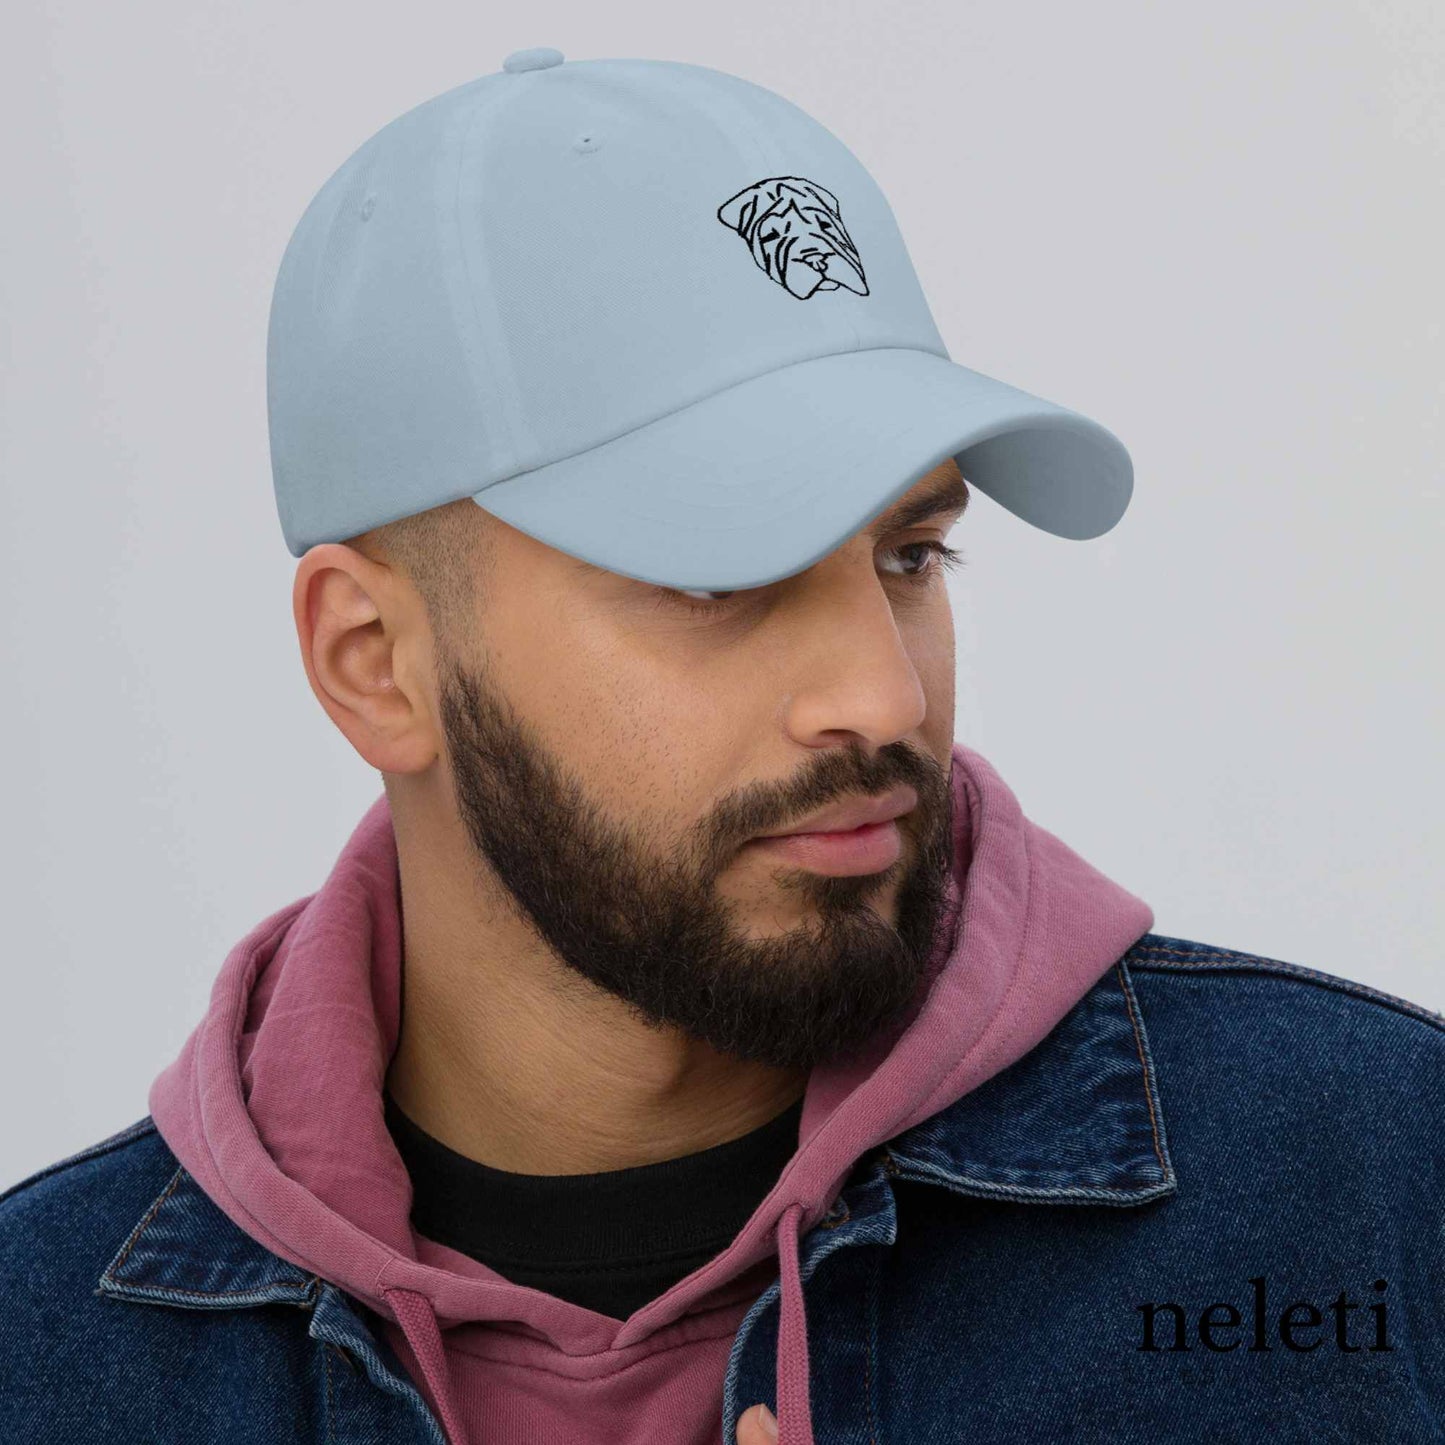 light-blue-baseball-cap-with-embroidered-dog-face